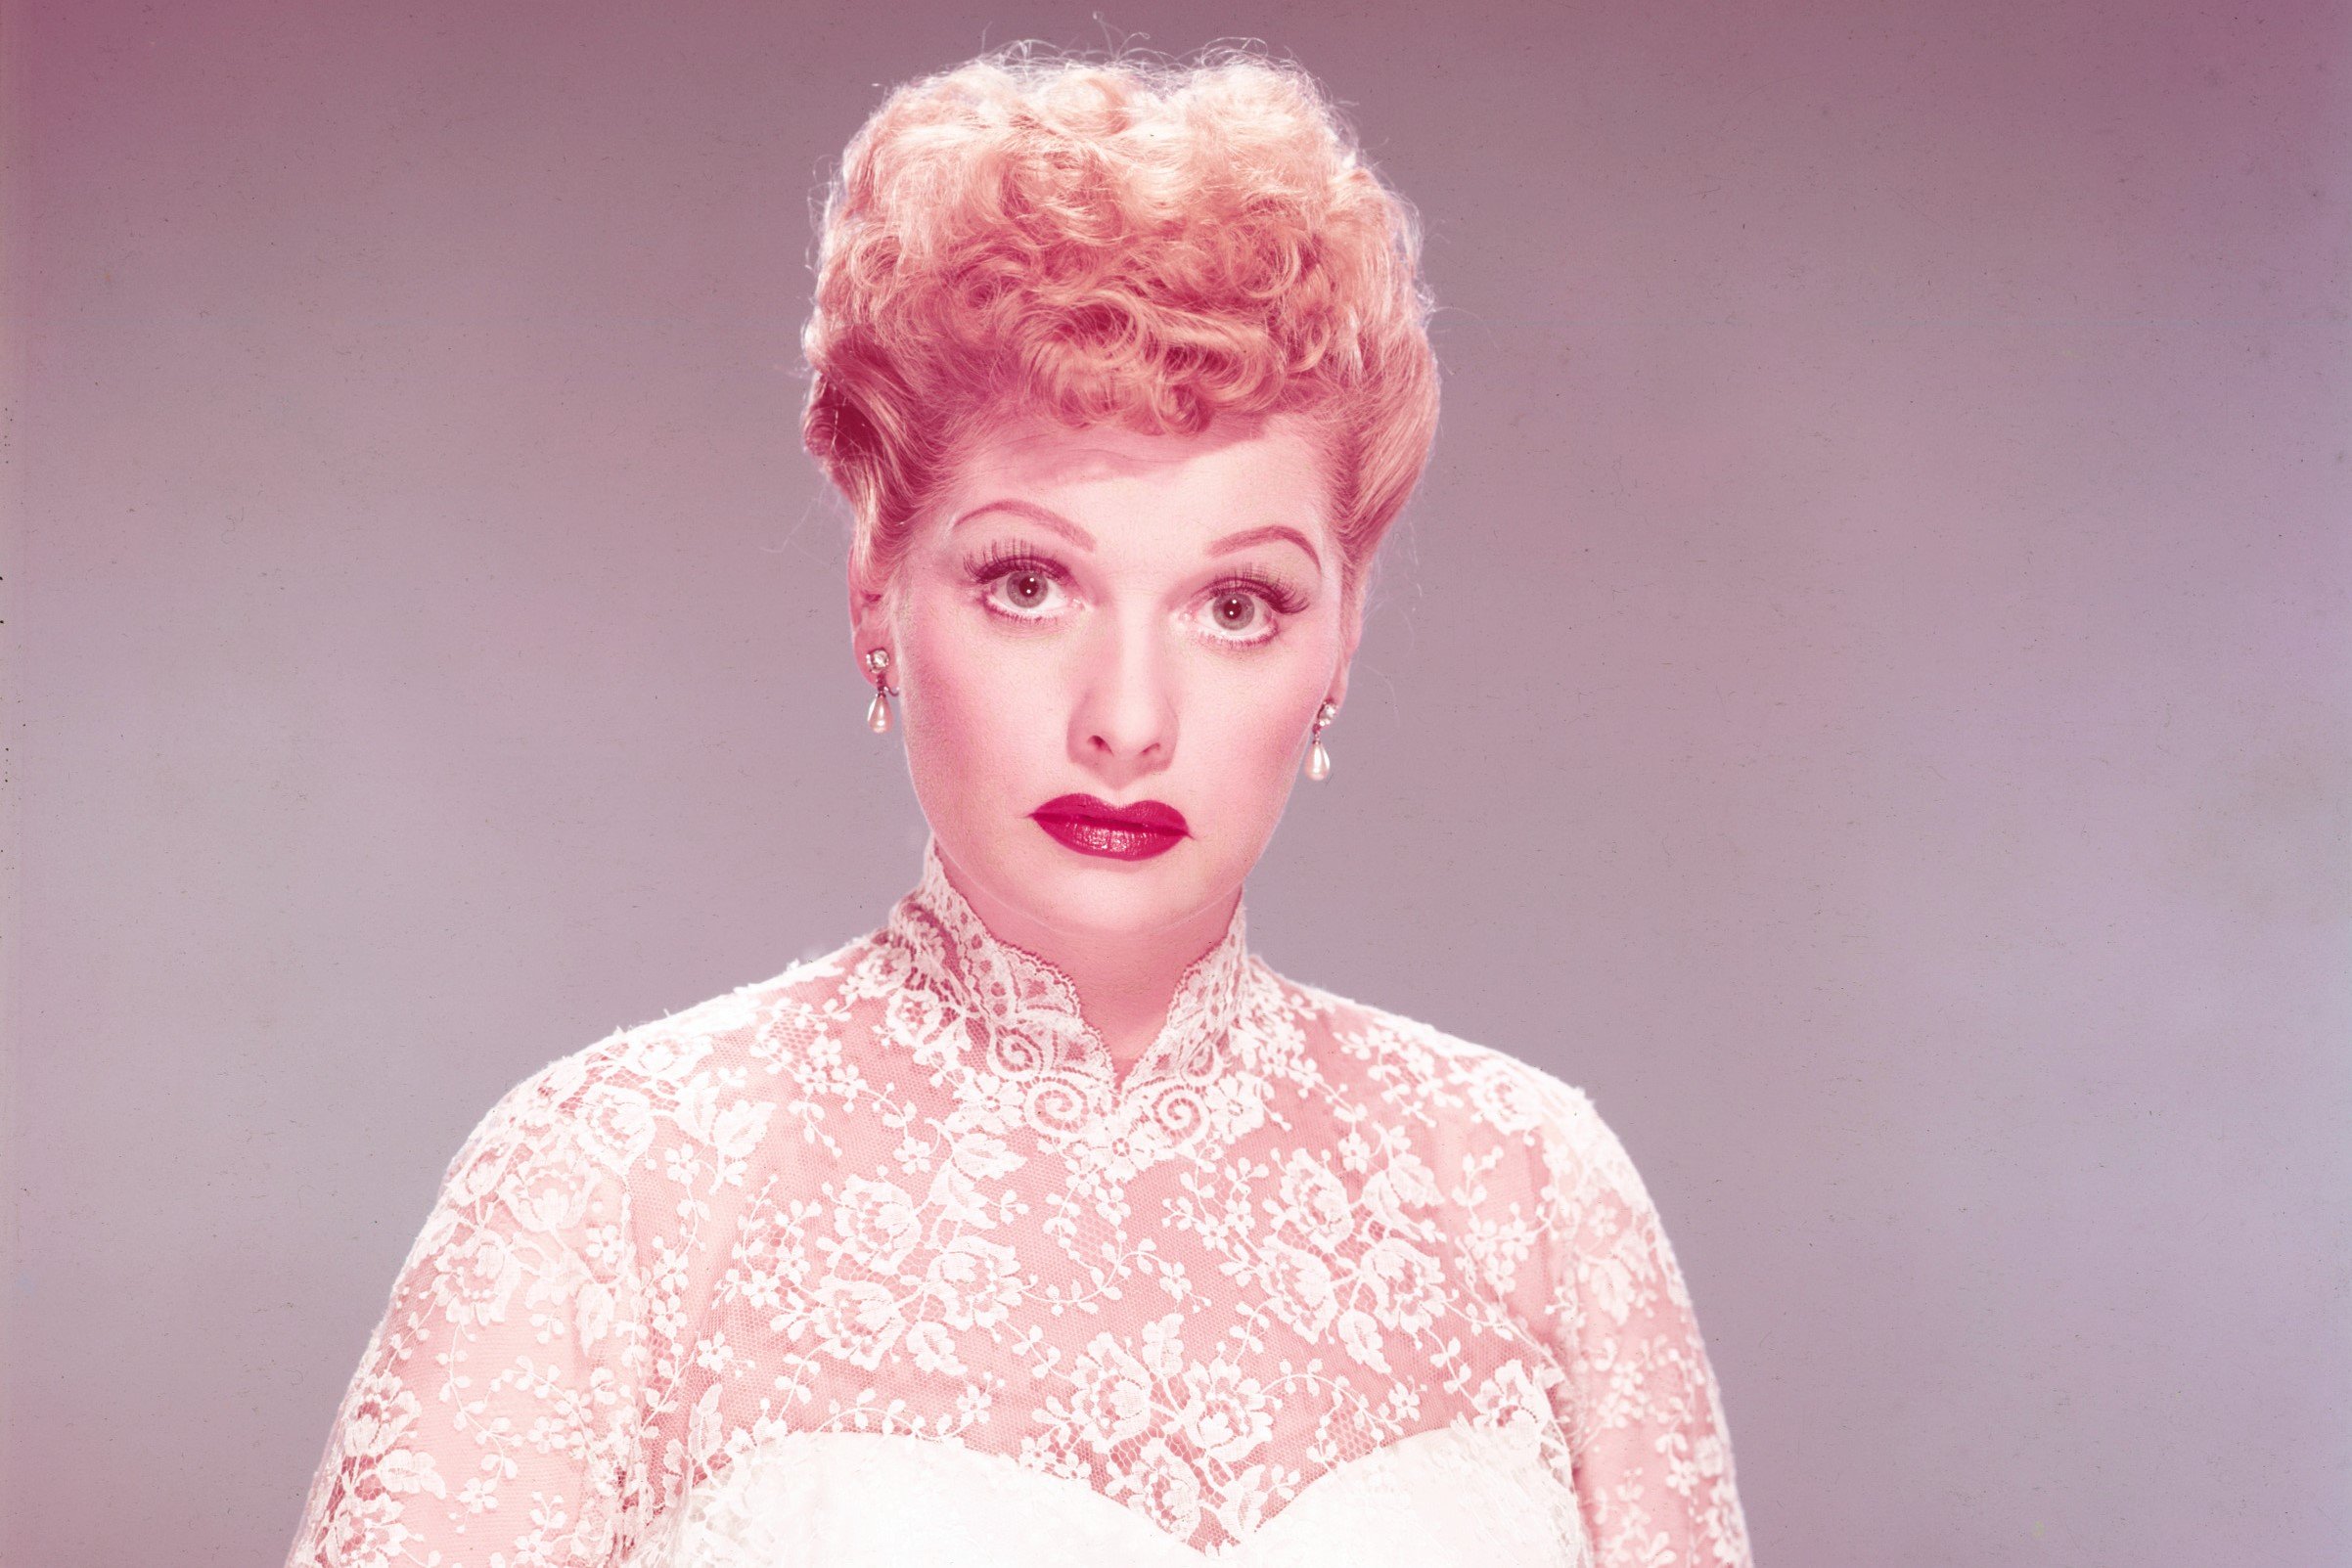 Lucille Ball wearing a white lace wedding dress, circa 1955.